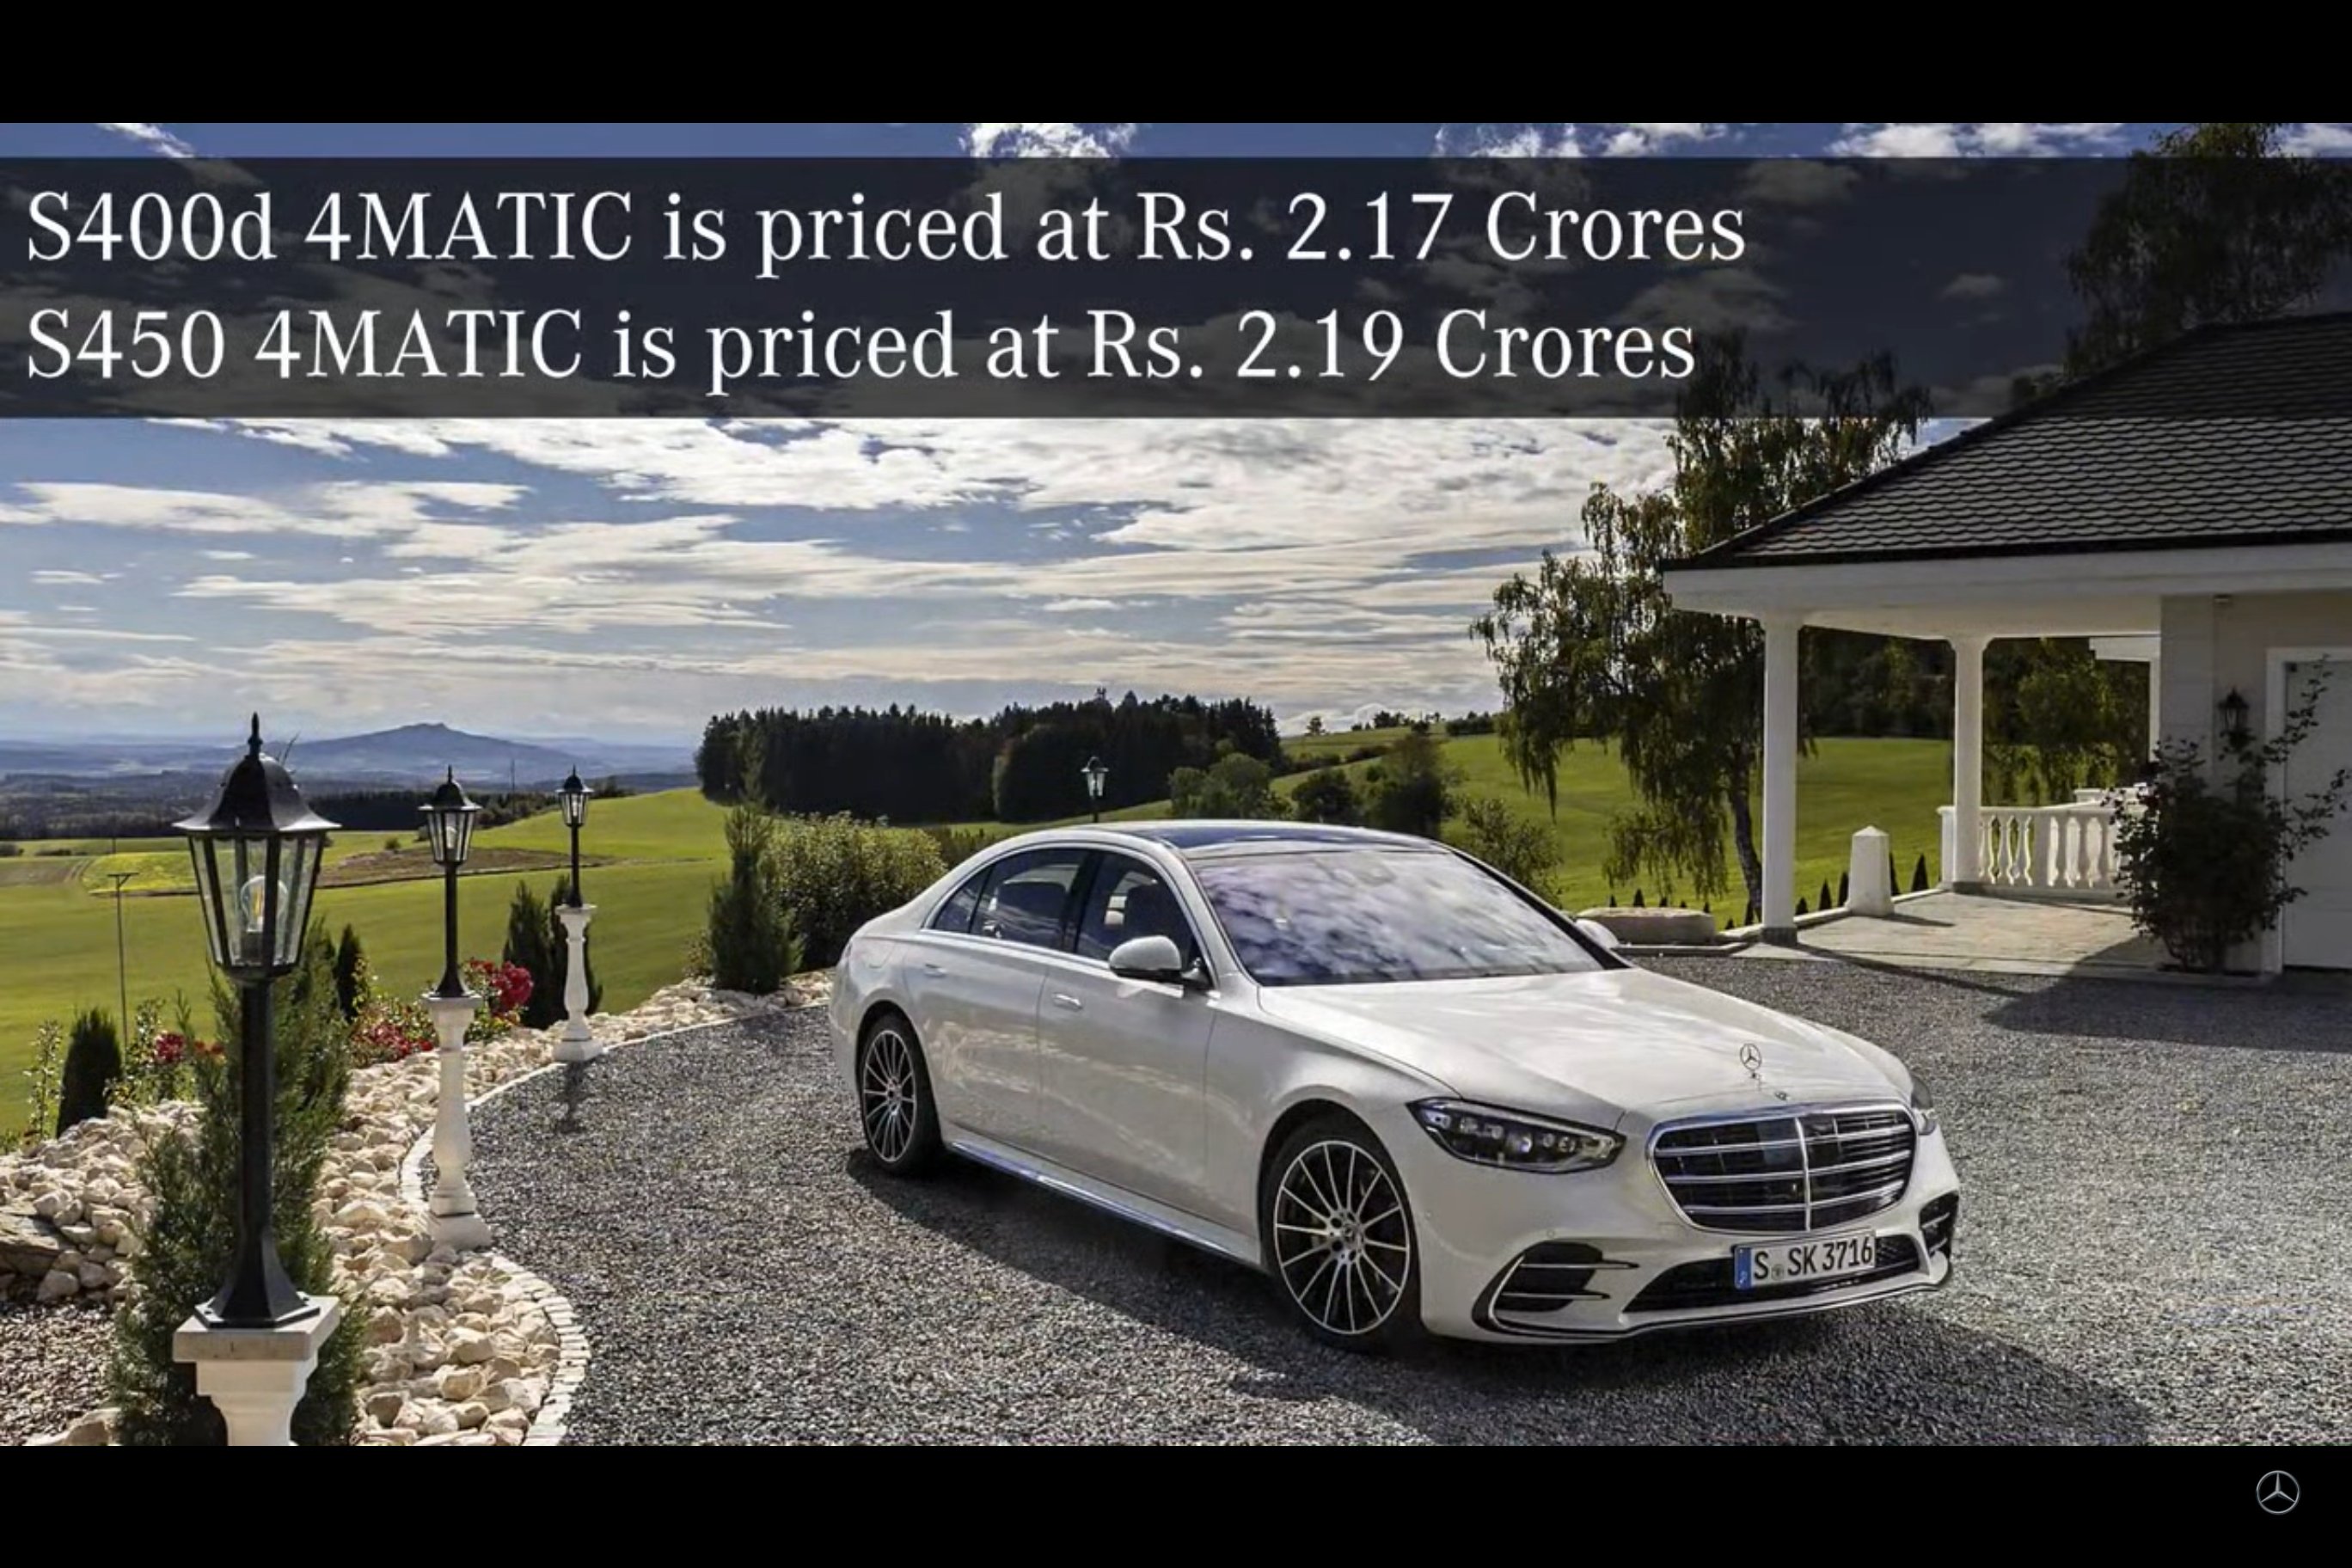 <p>Prices for the new Mercedes-Benz S-Class start at Rs 2.17 Crore for the diesel S400d 4MATIC, and going up to Rs 2.19 crore for the petrol powered S450 4MATIC.&nbsp;<br />
Expensive, you bet. But then the best don&#39;t come cheap!&nbsp;</p>

